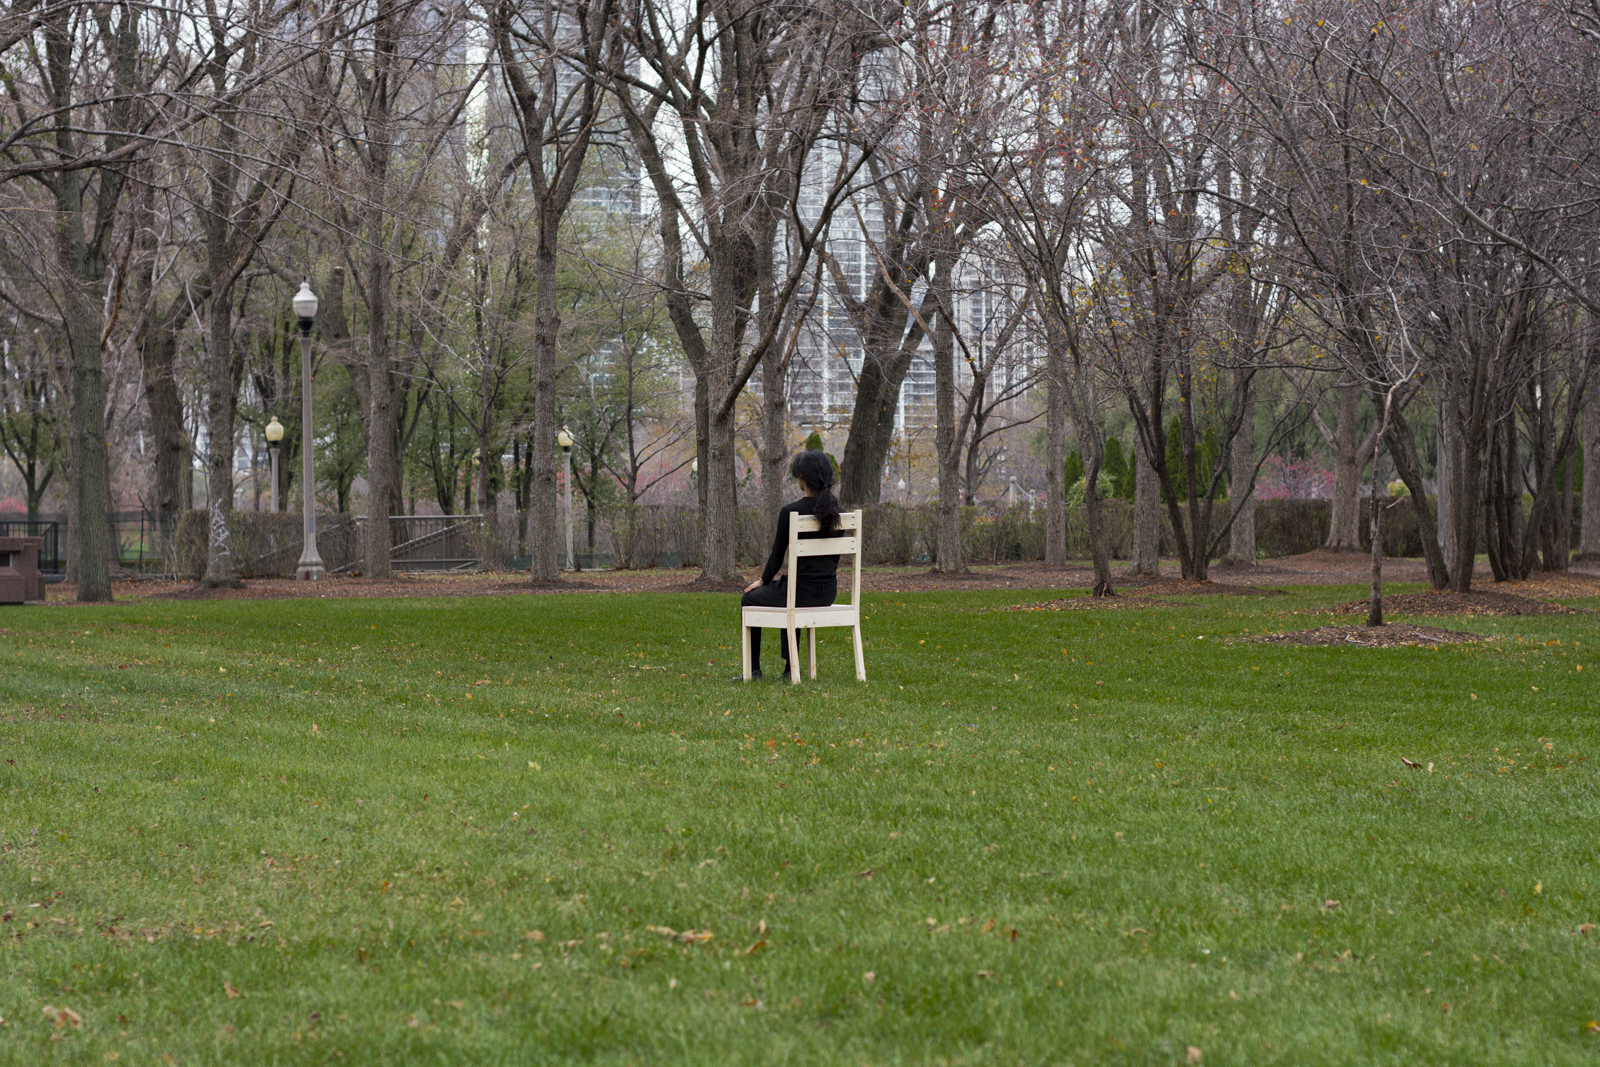 The artist is photographed from a distance wearing all black and seated on a wooden chair. Their face looks away from the camera. They are facing south. They are seated within a grassy park.